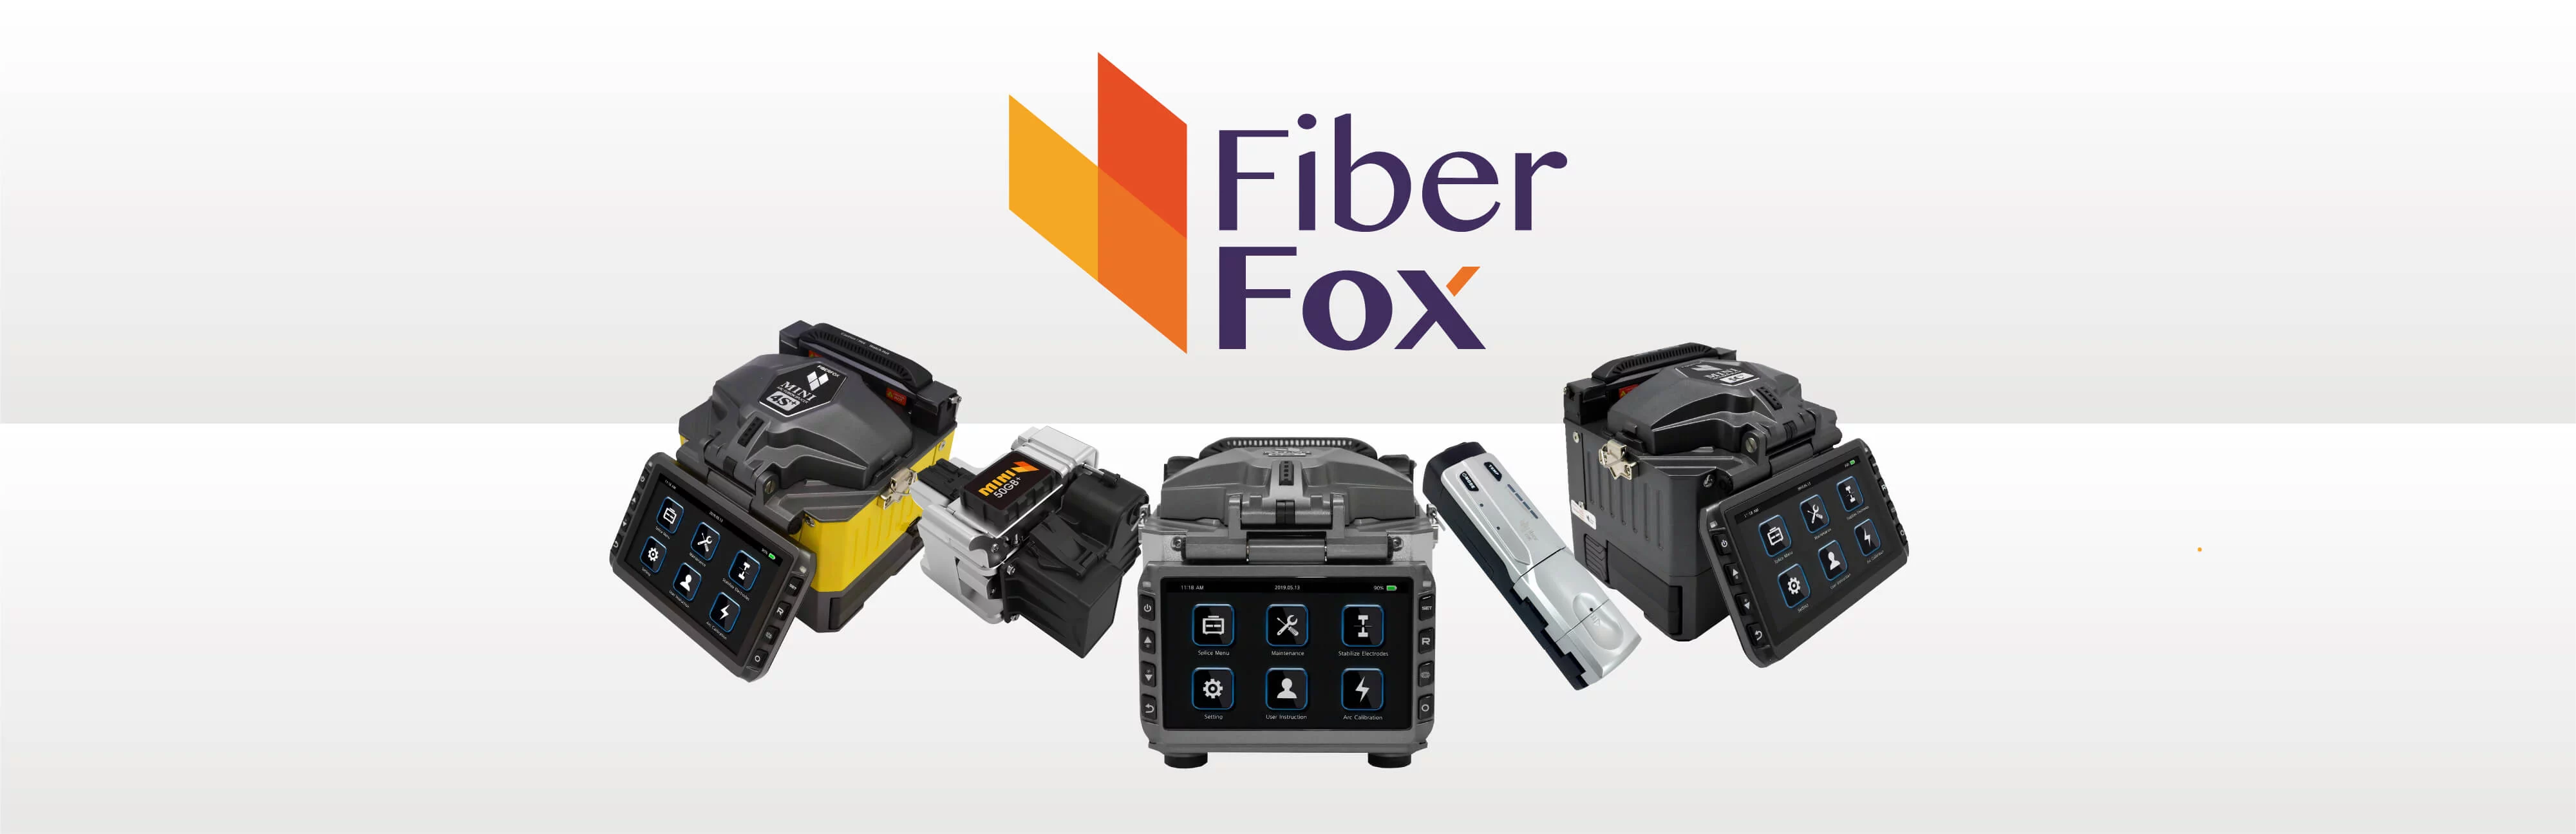 FiberFox Fusion Splicer Devices are Available in Turkey from Telecom Samm